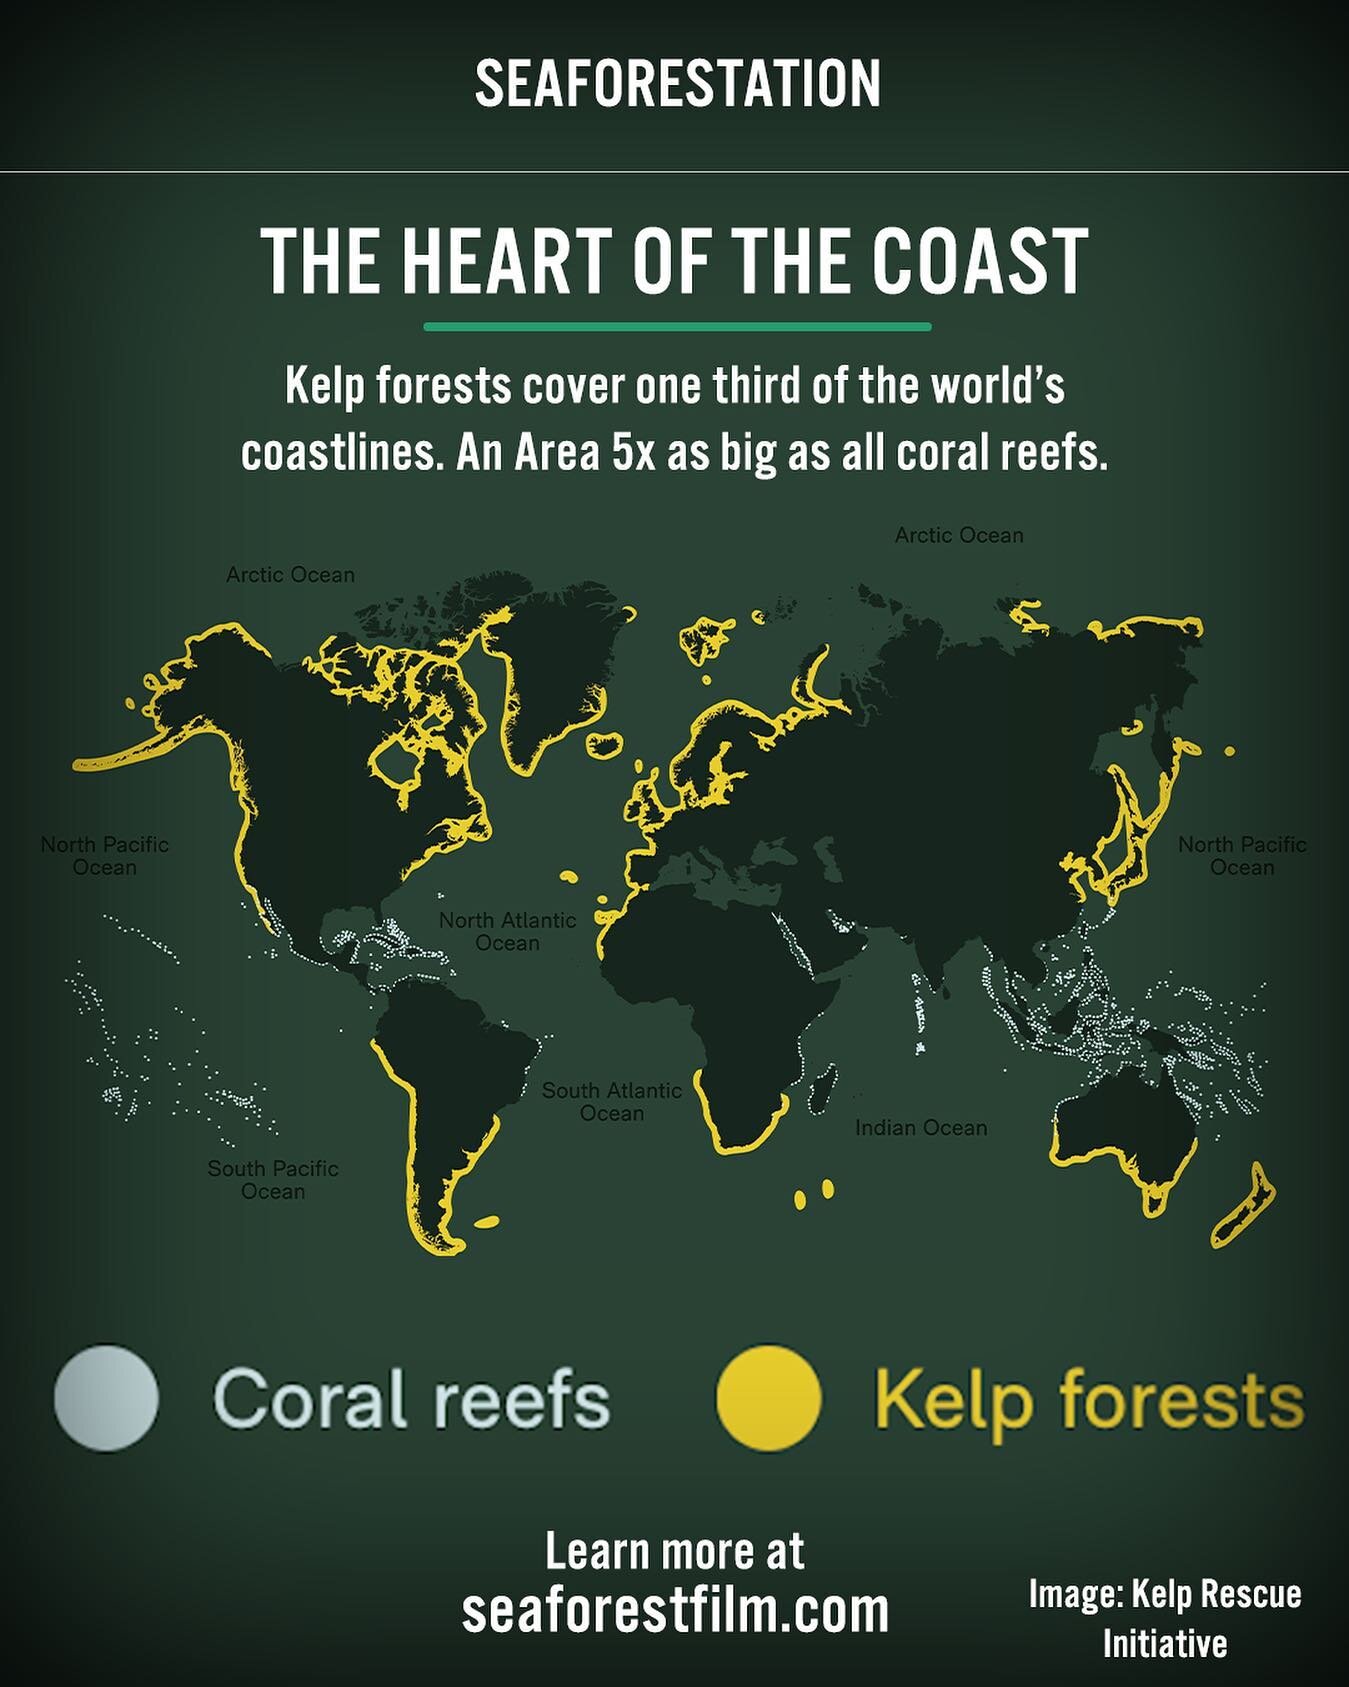 This world map from the Kelp Rescue Initiative shows the scale of kelp forests. Most of the world's population lives on coasts near kelp beds. This shows the true gravity of the situatuon and what is at stake here. If we lose kelp forests basically w